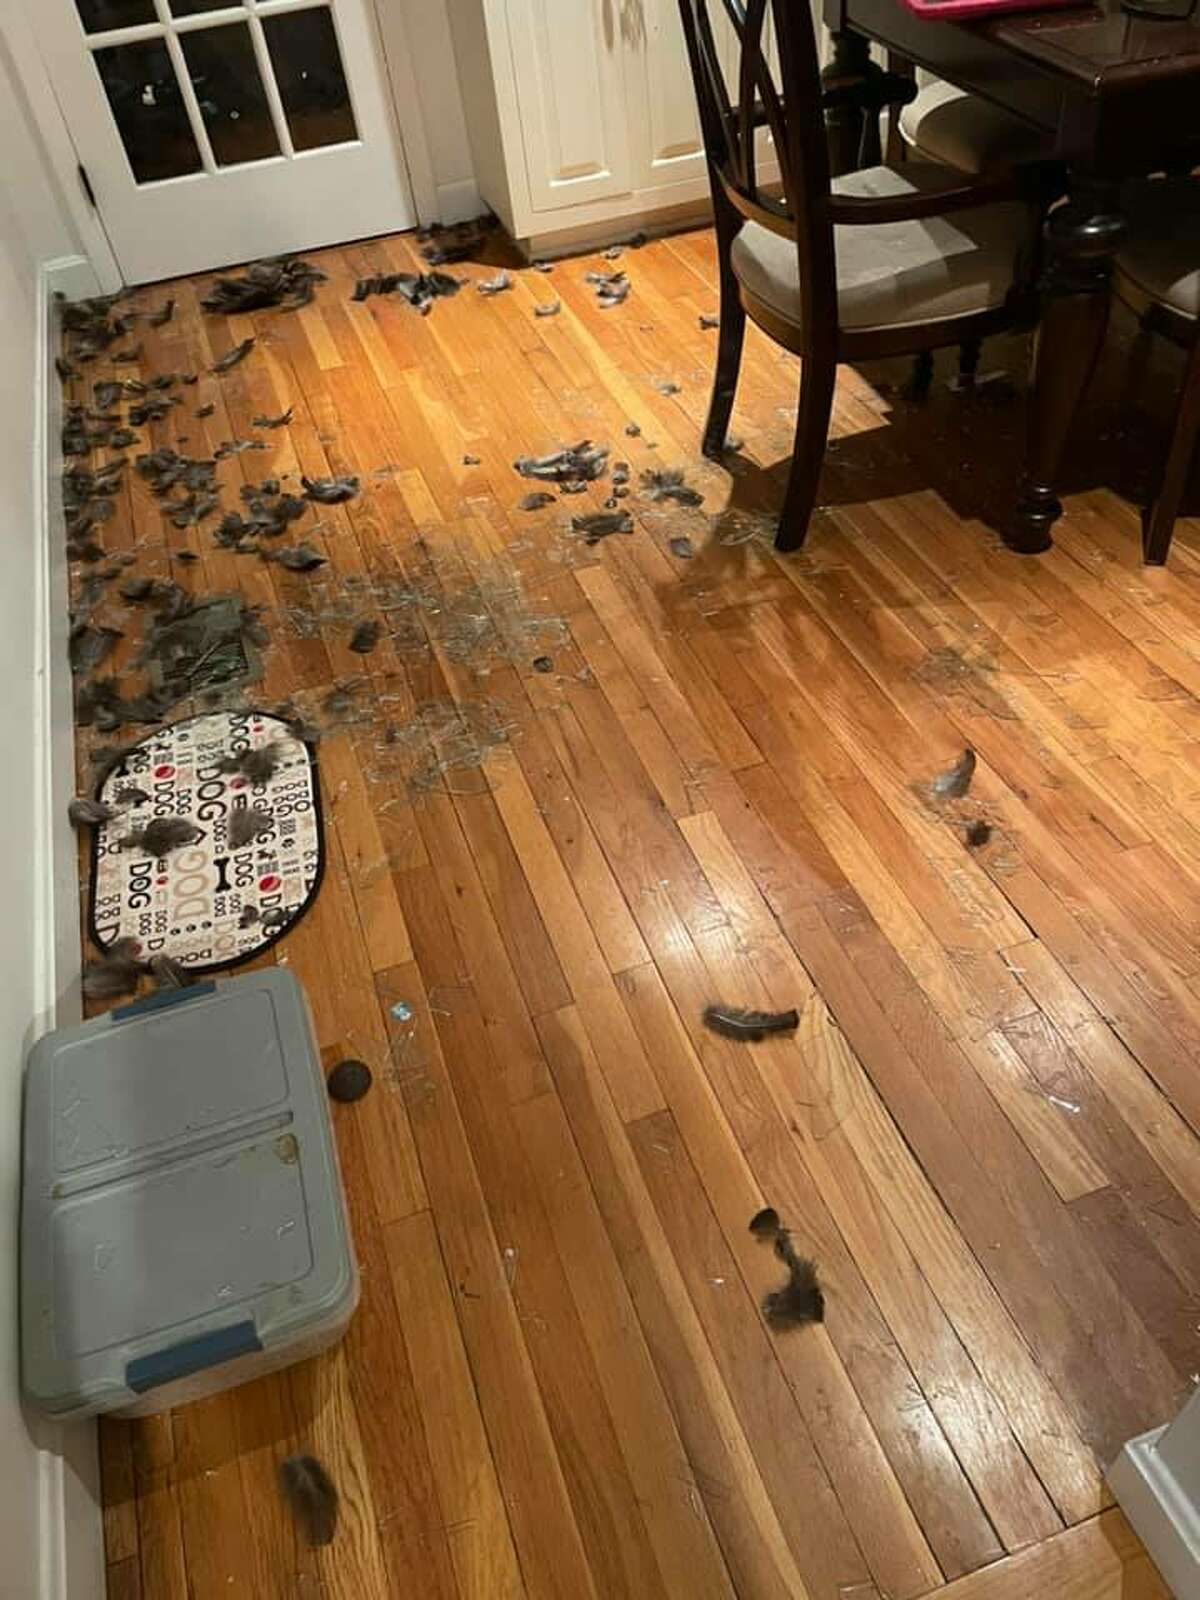 A wild turkey crashed through the dining room window of a West Norwalk home on Friday, March 26.